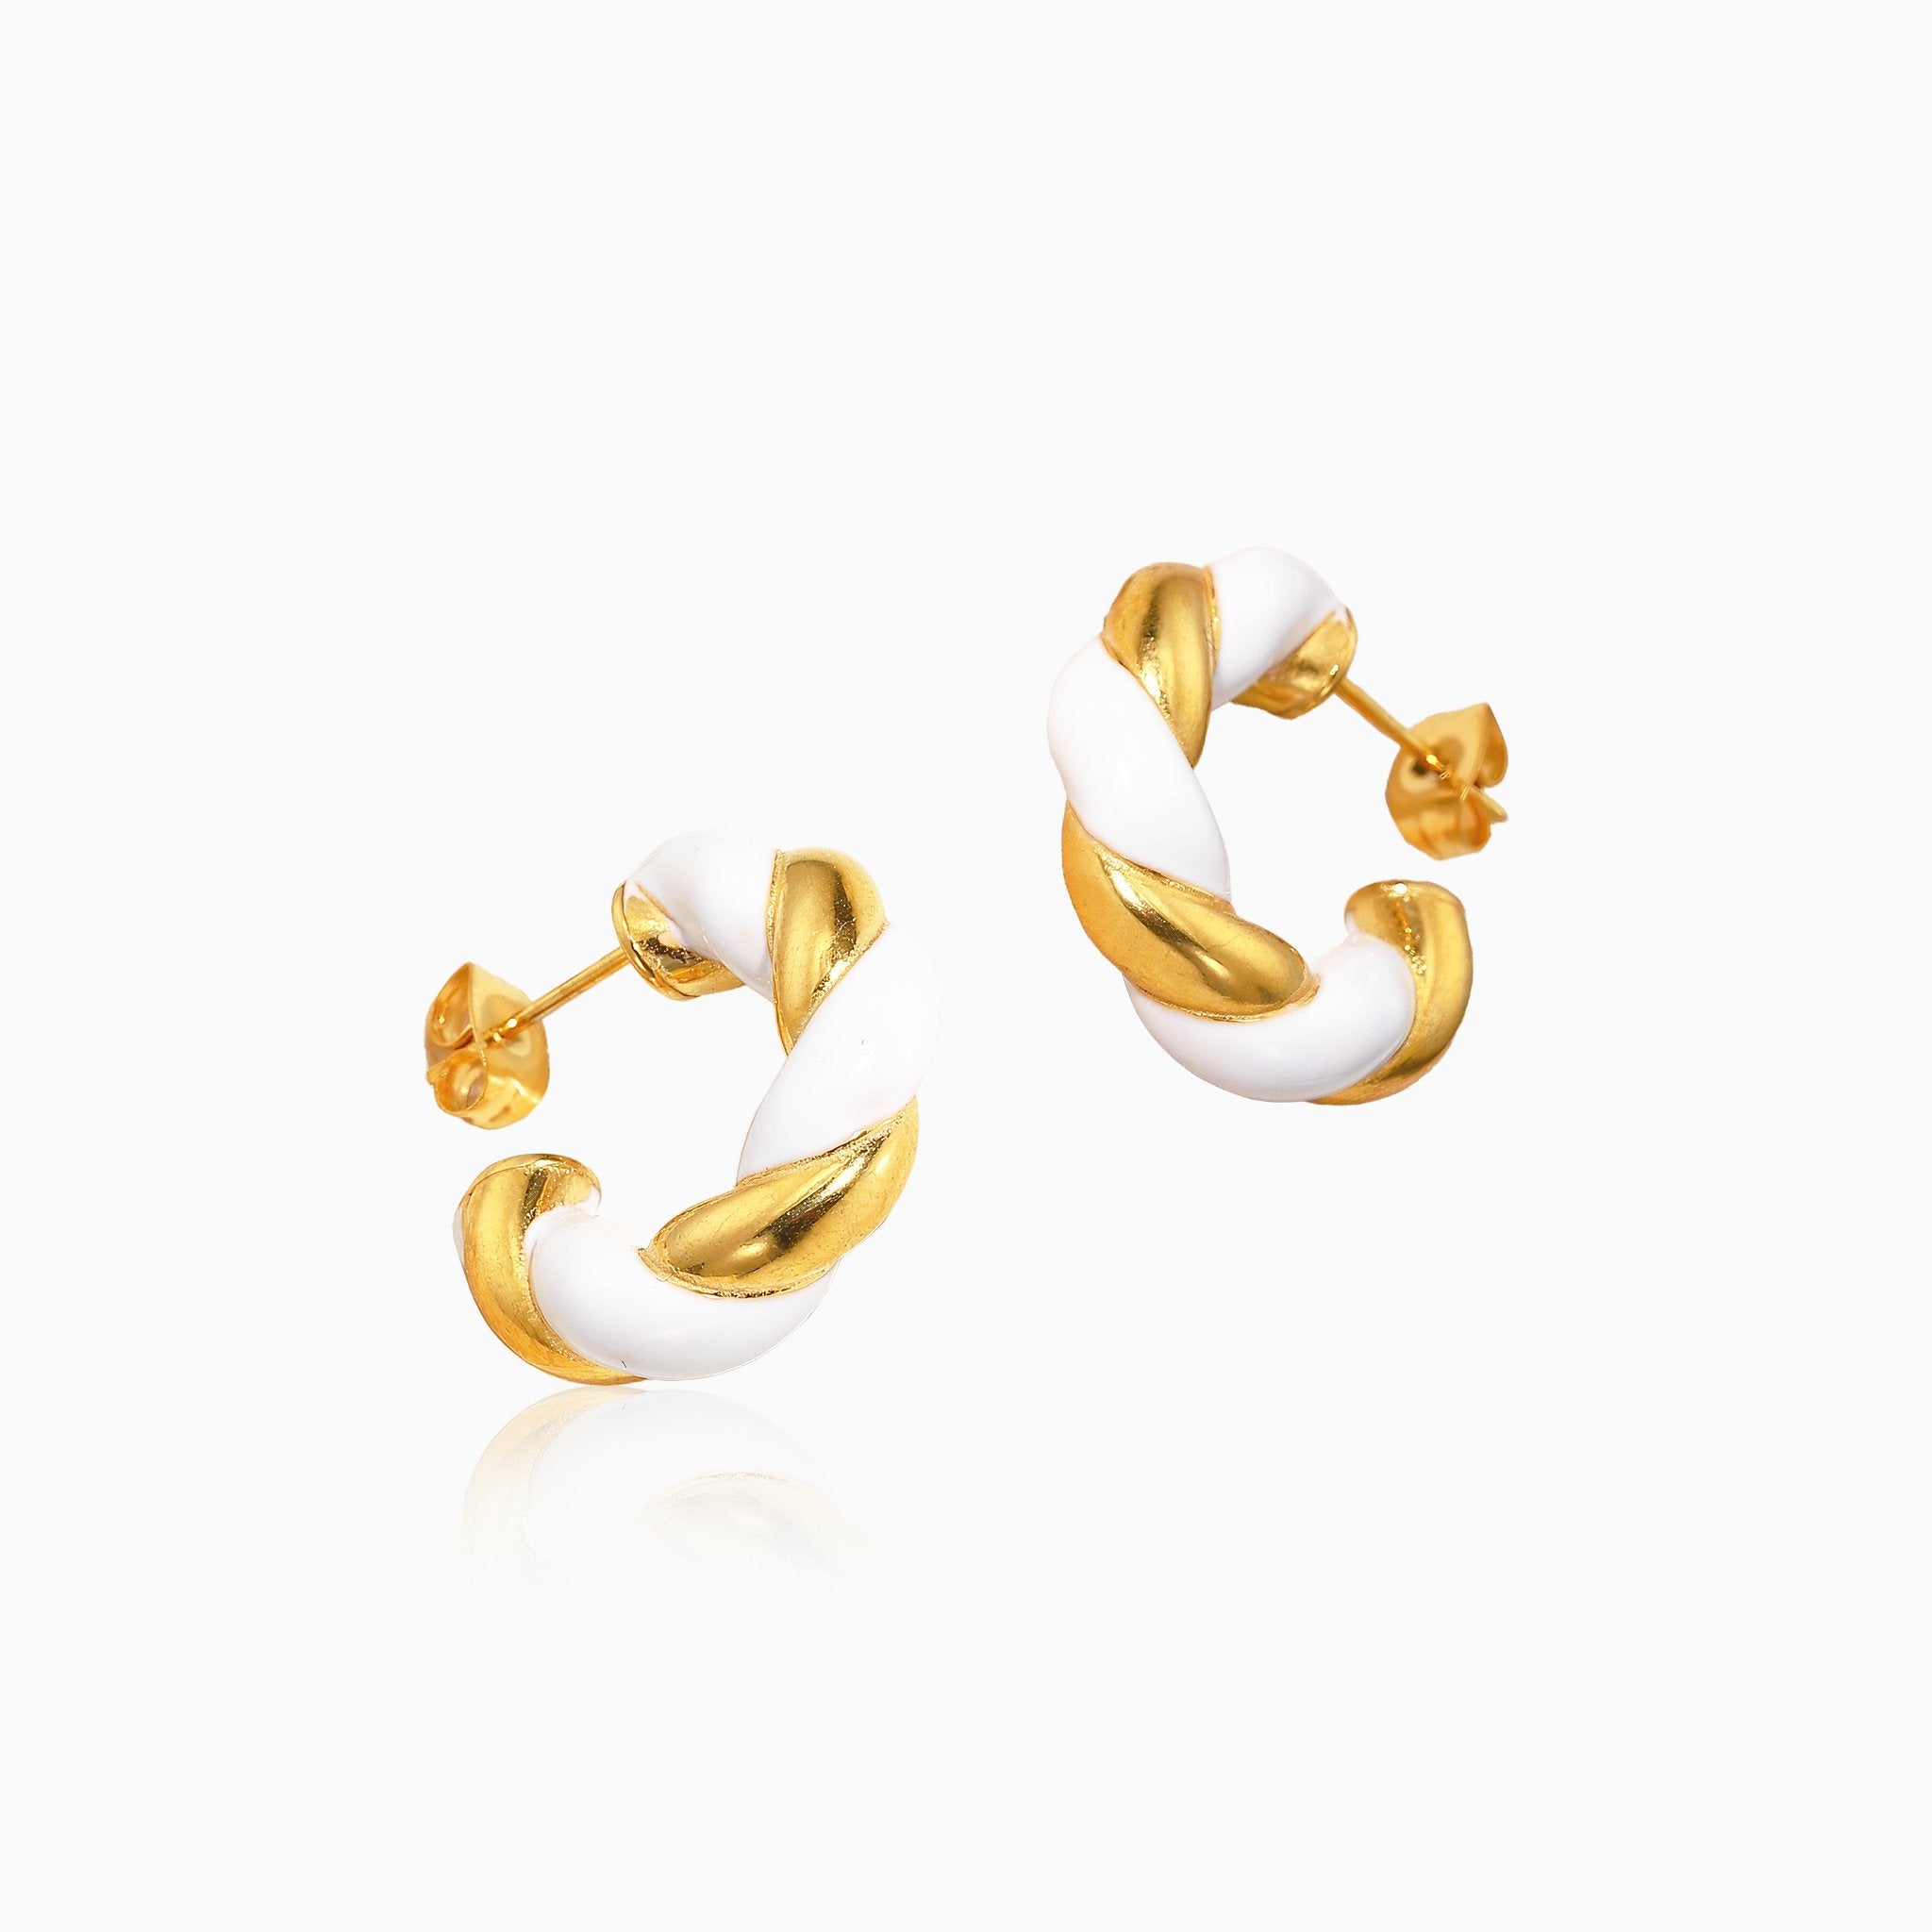 Twisted C Earrings - Nobbier - Earrings - 18K Gold And Titanium PVD Coated Jewelry